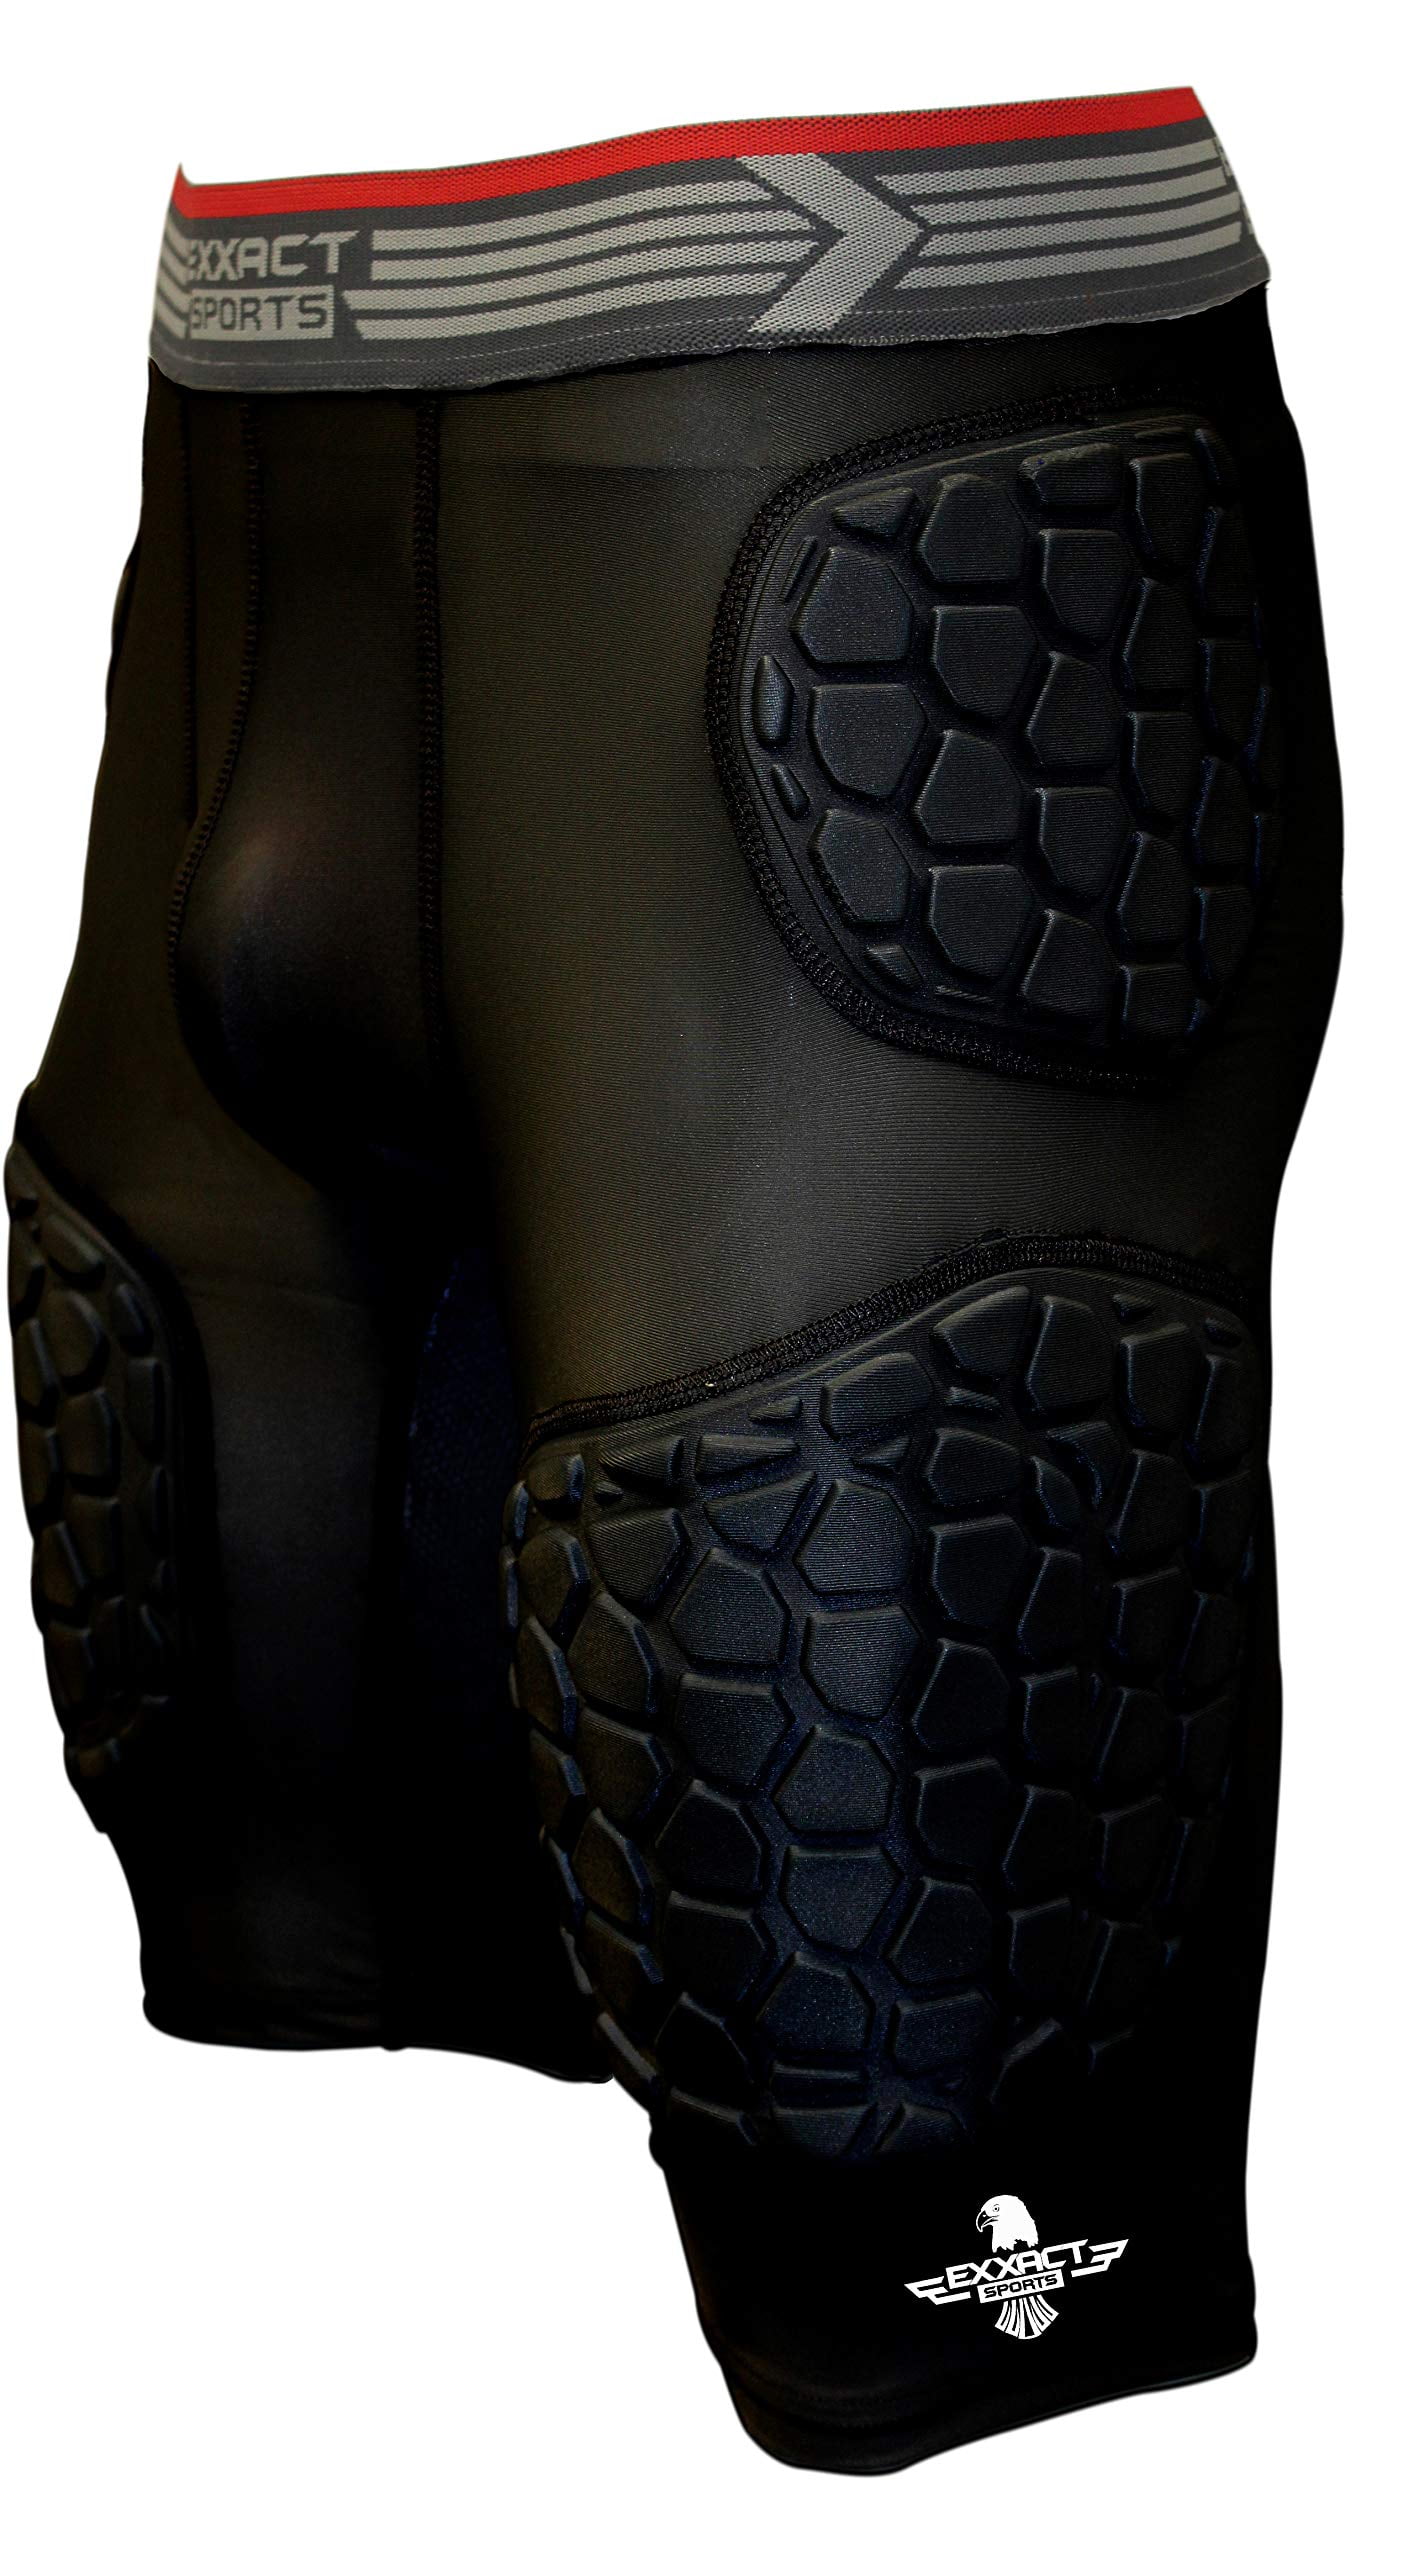 w/ Integrated Padding Exxact Sports Elite 5-Pad Football Girdle Padded Compression Shorts Adult 